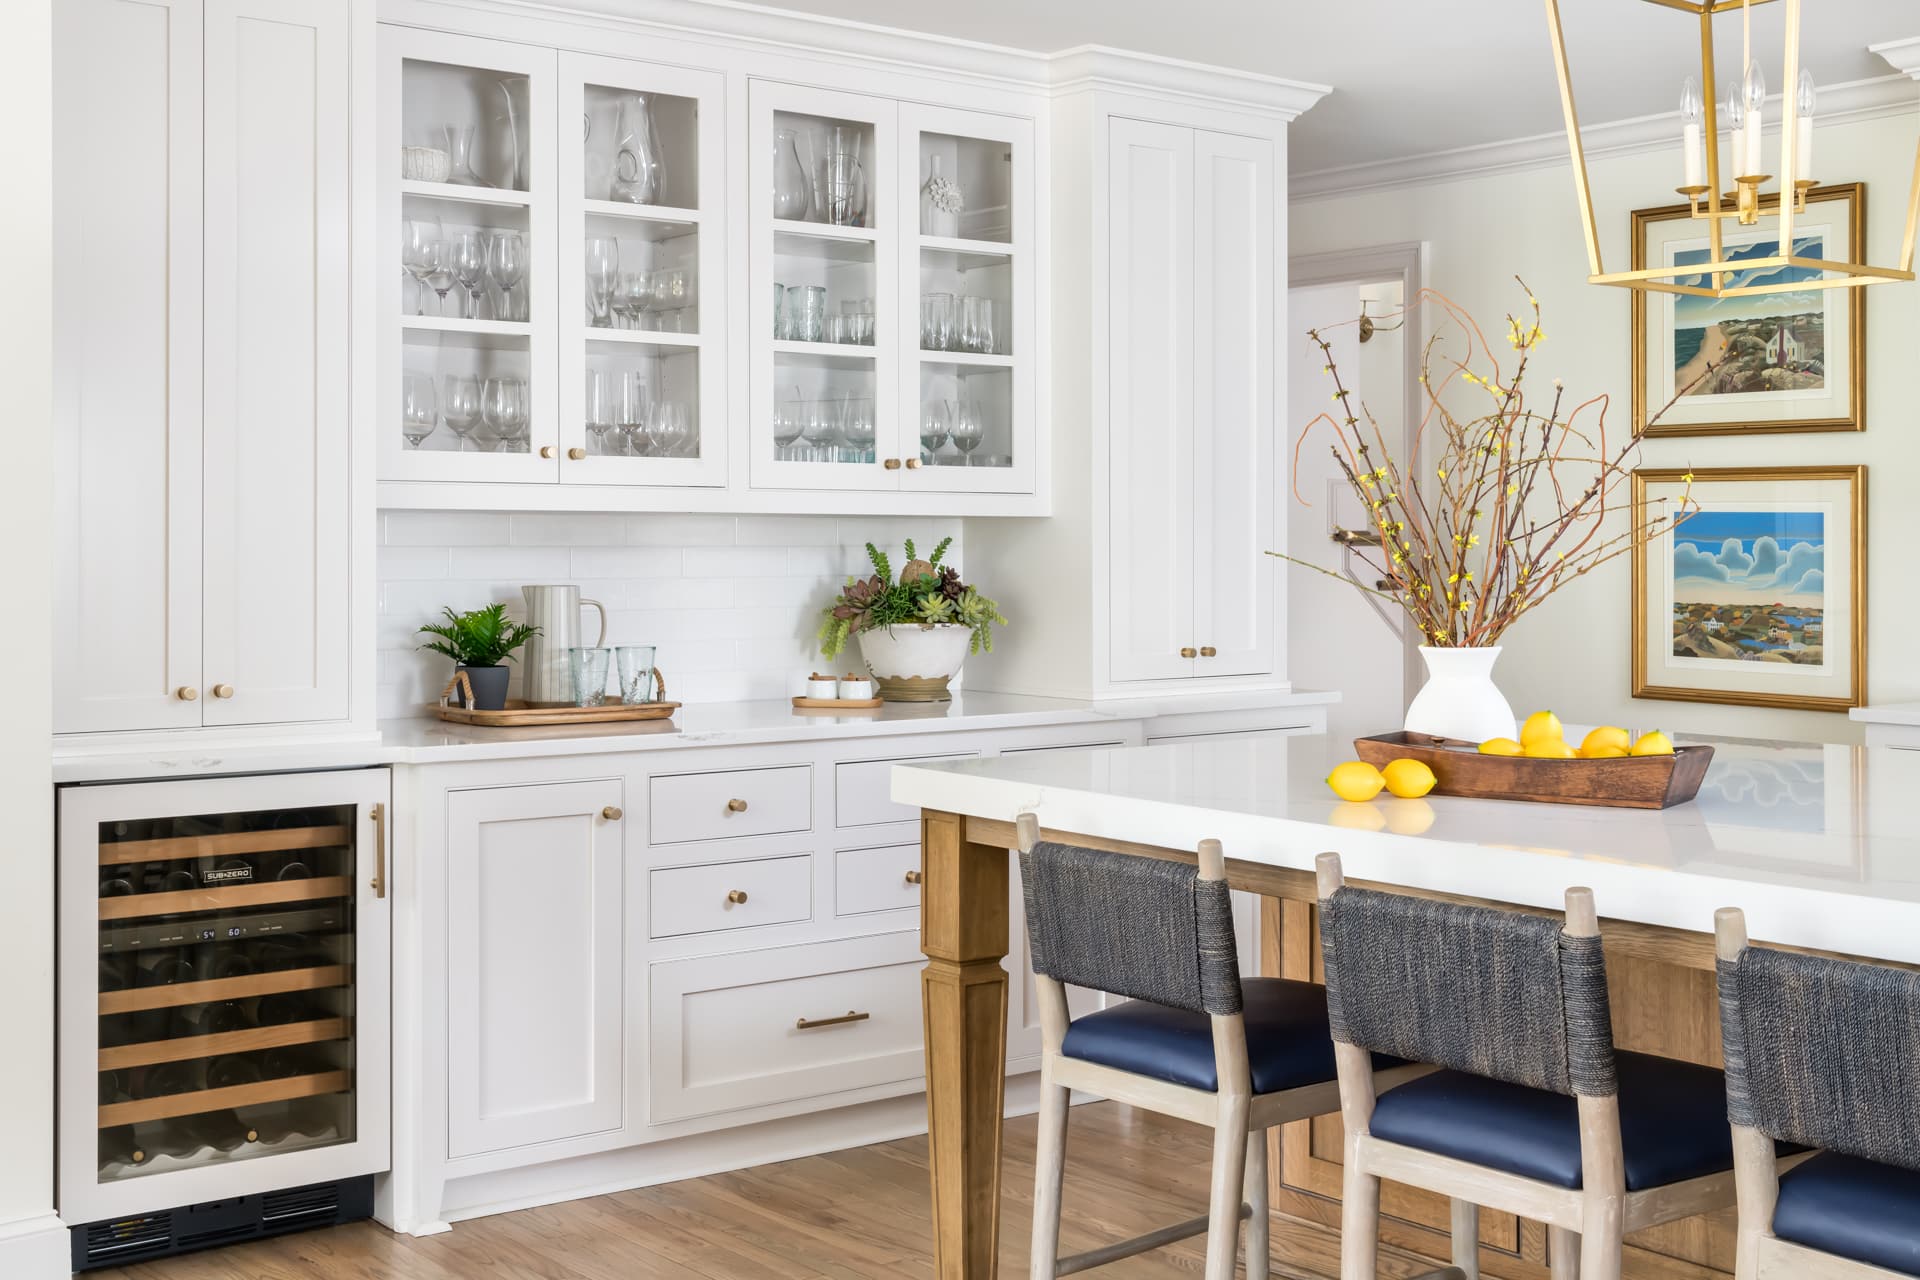 Transitional kitchen with white kitchen buffet, white counters, and glass door upper cabinets.